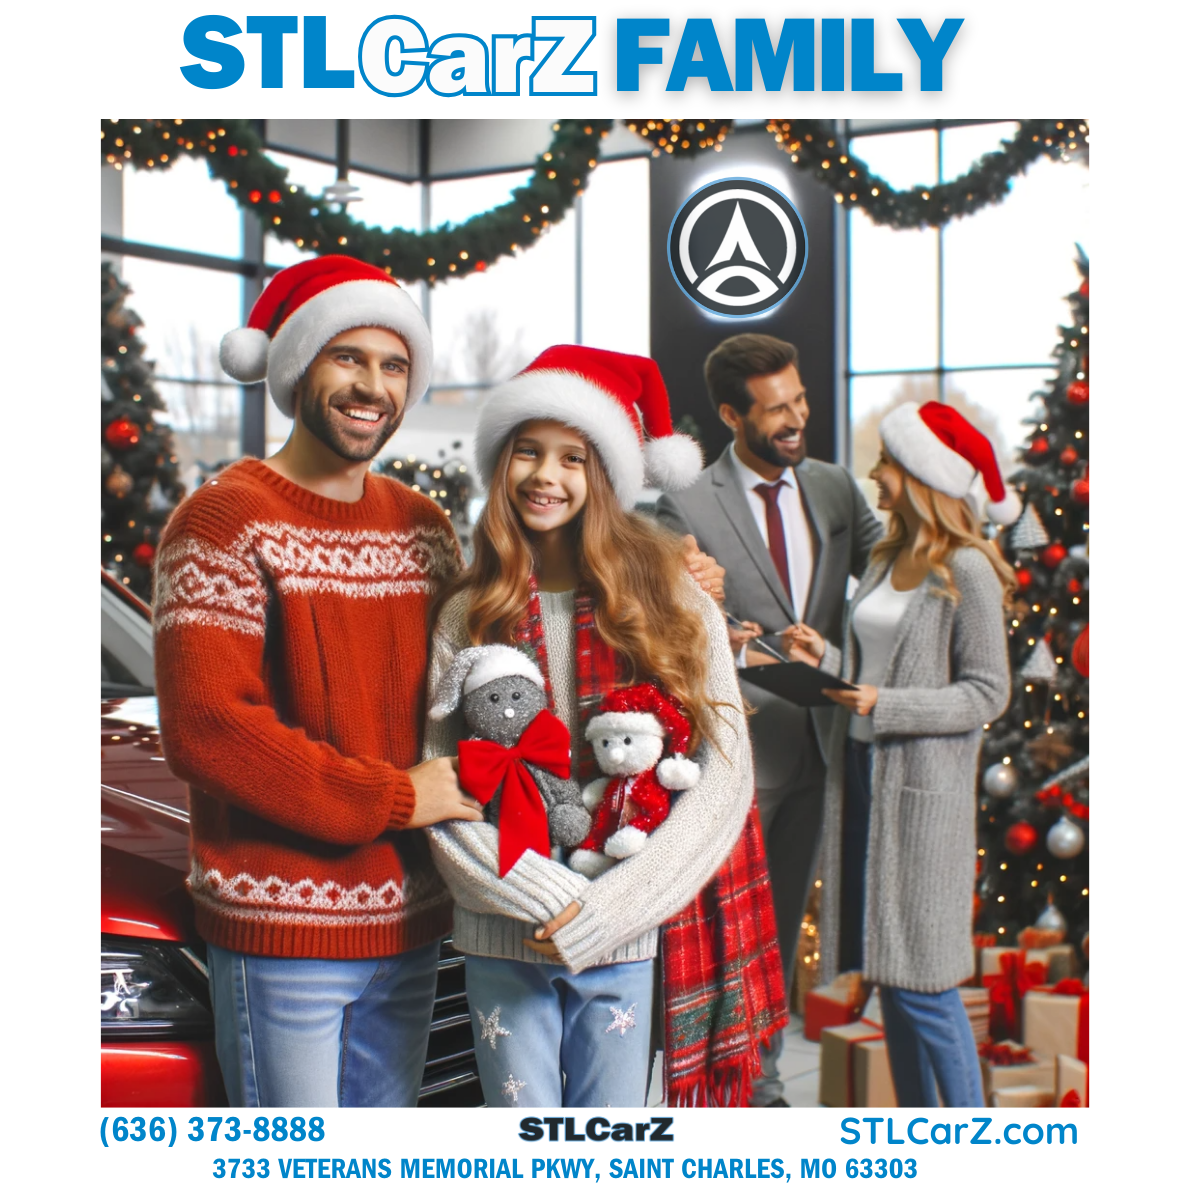 happy family in red Christmas sweaters and red hats in stlcarz delaership